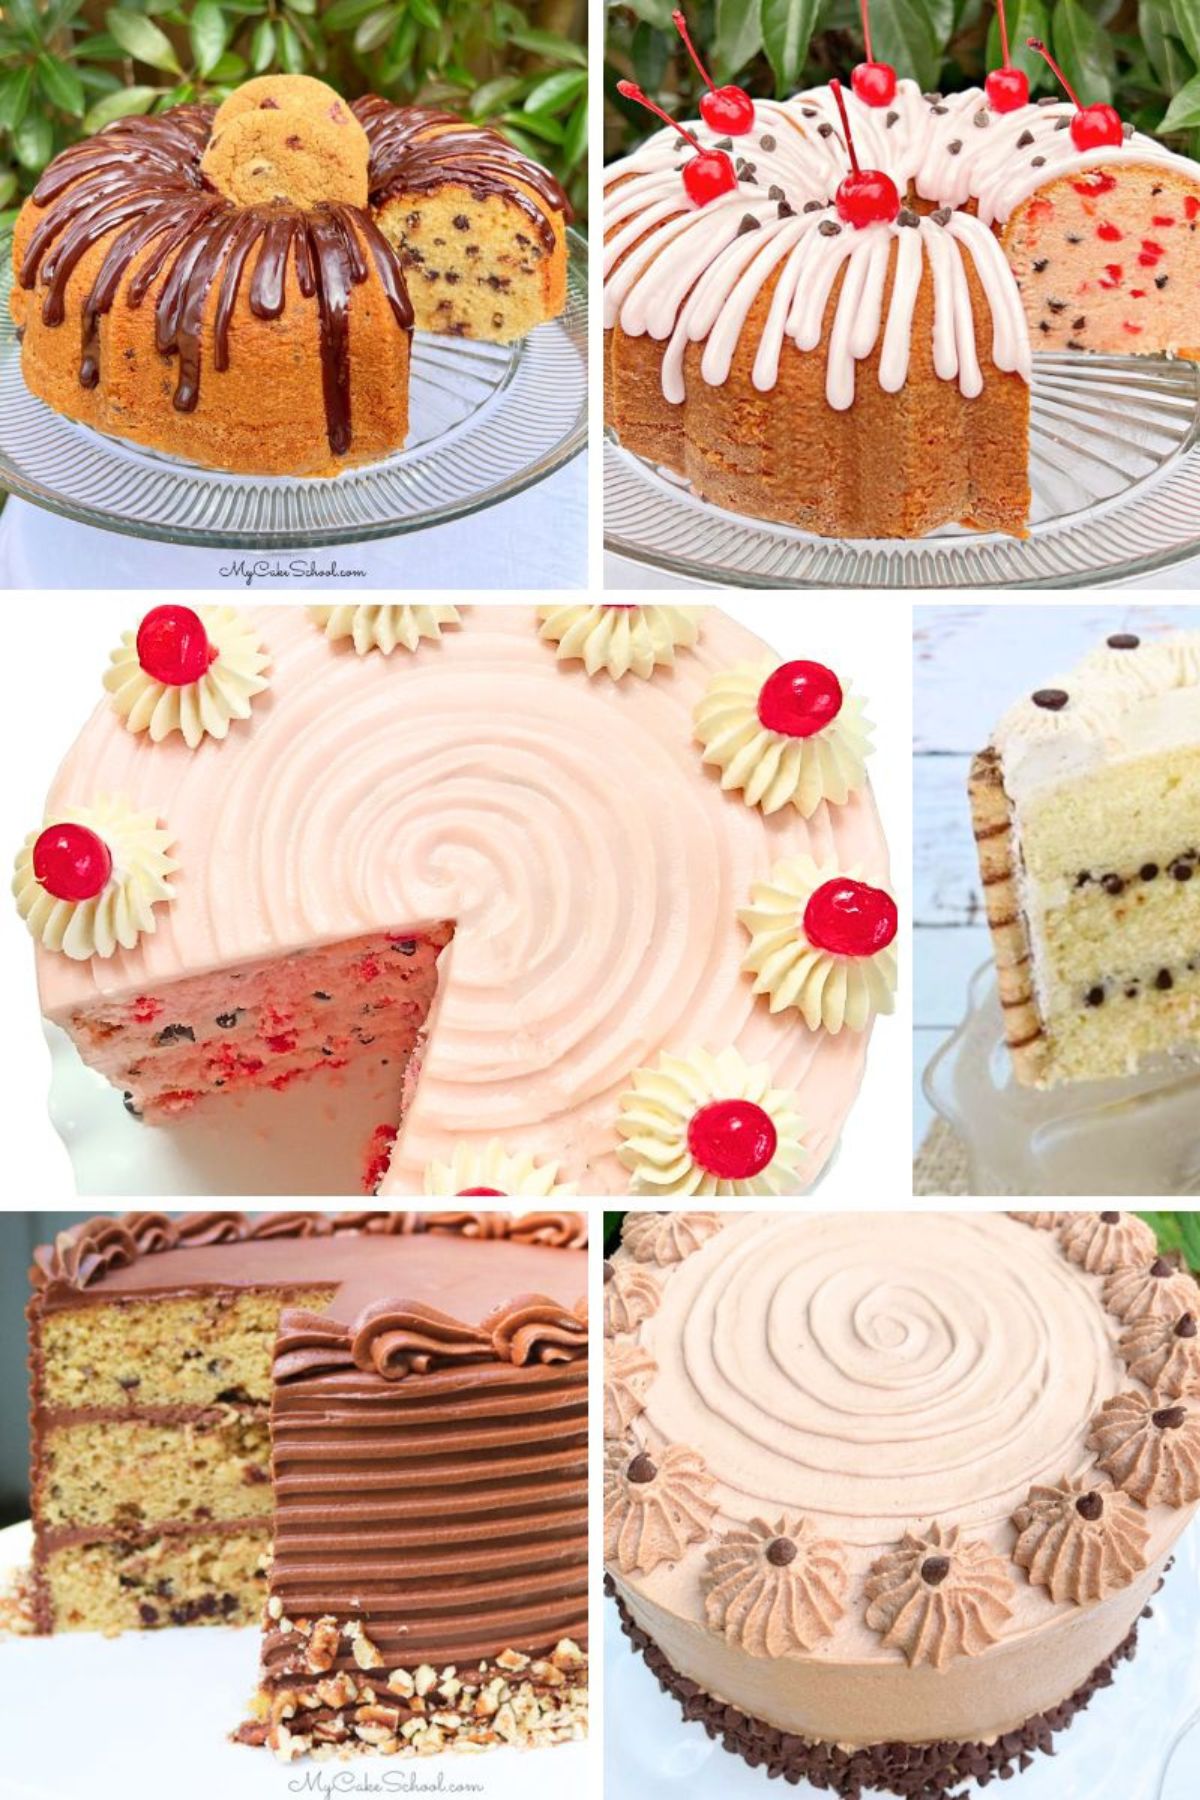 Collage of Chocolate Chip Cakes